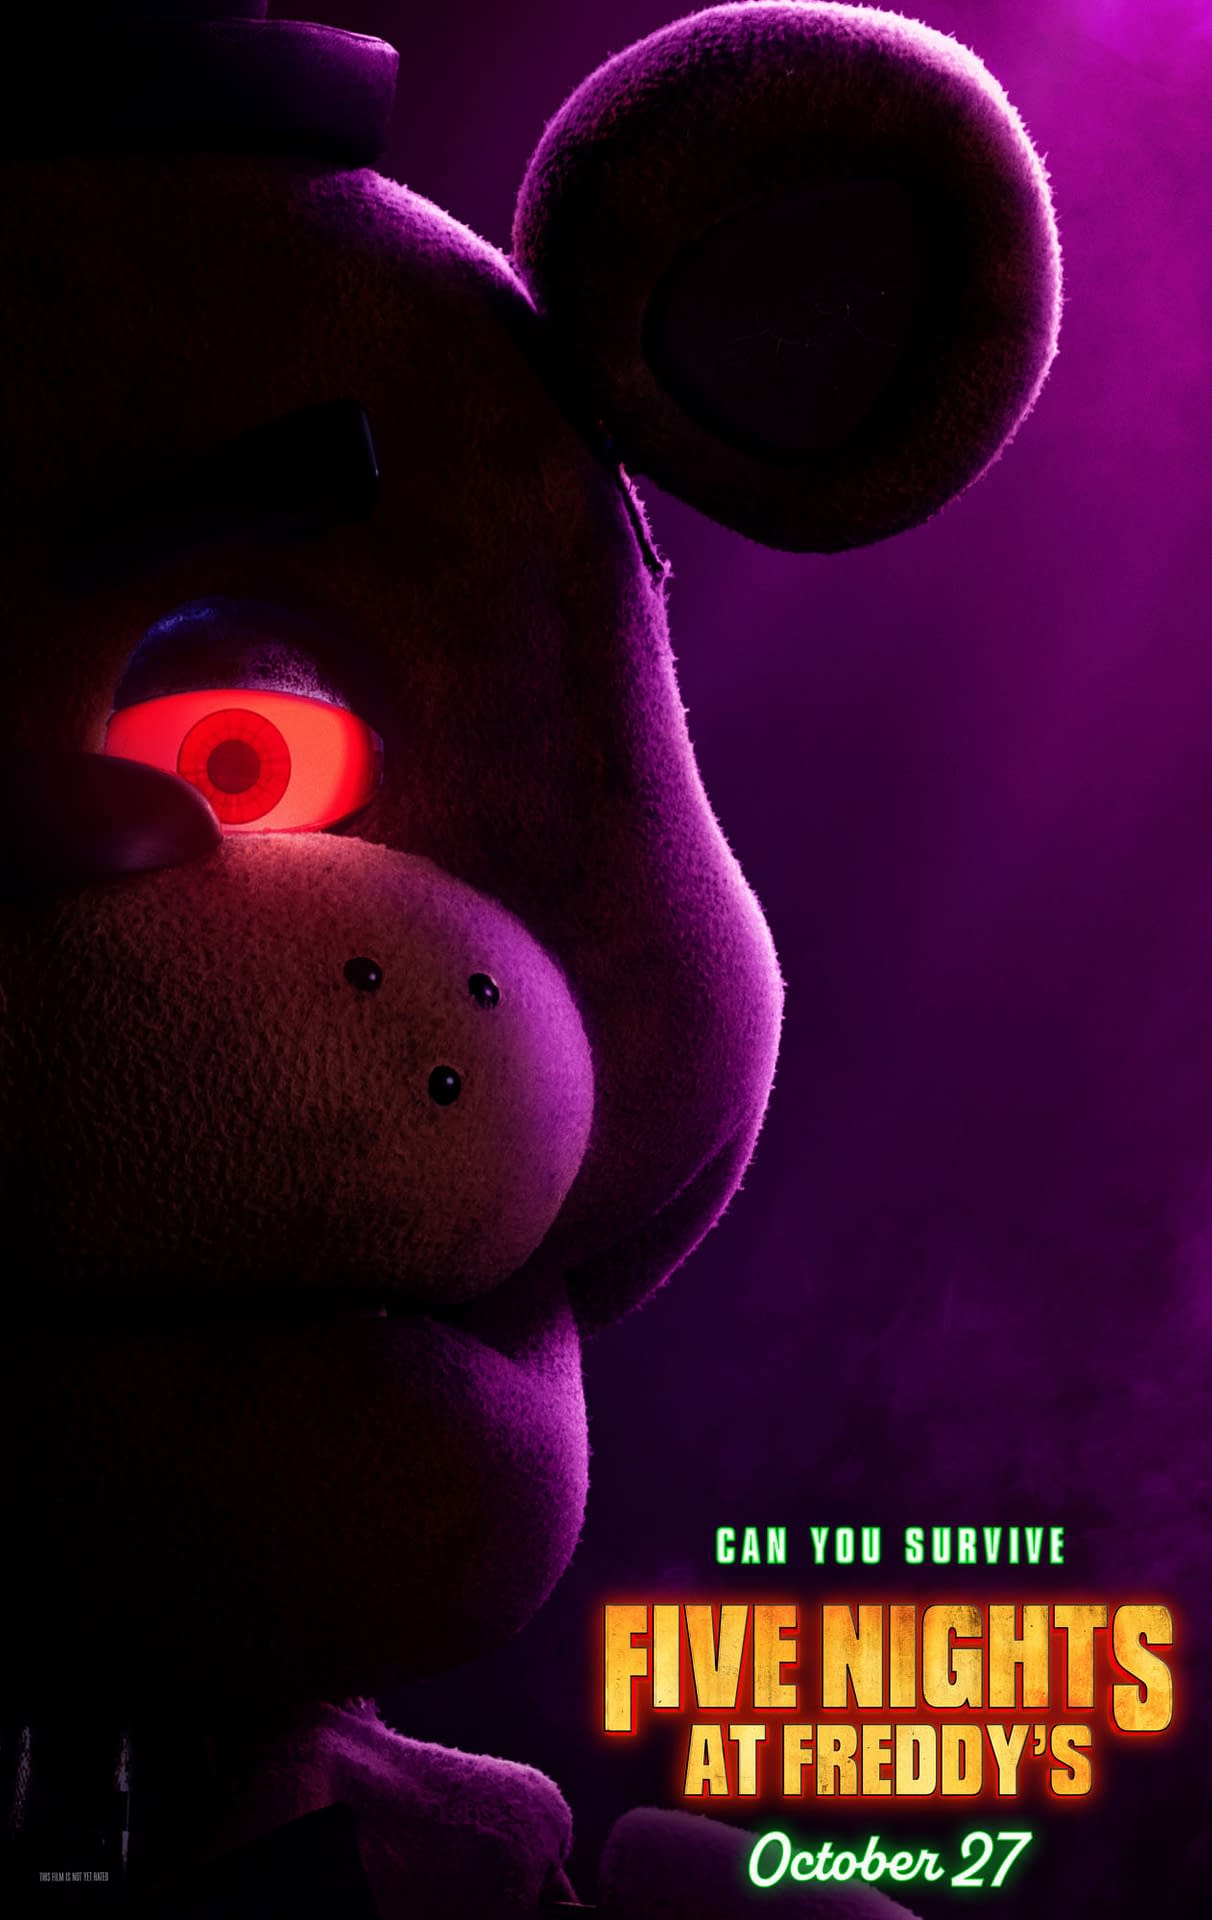 Five Nights At Freddy's Full Trailer Released By Blumhouse